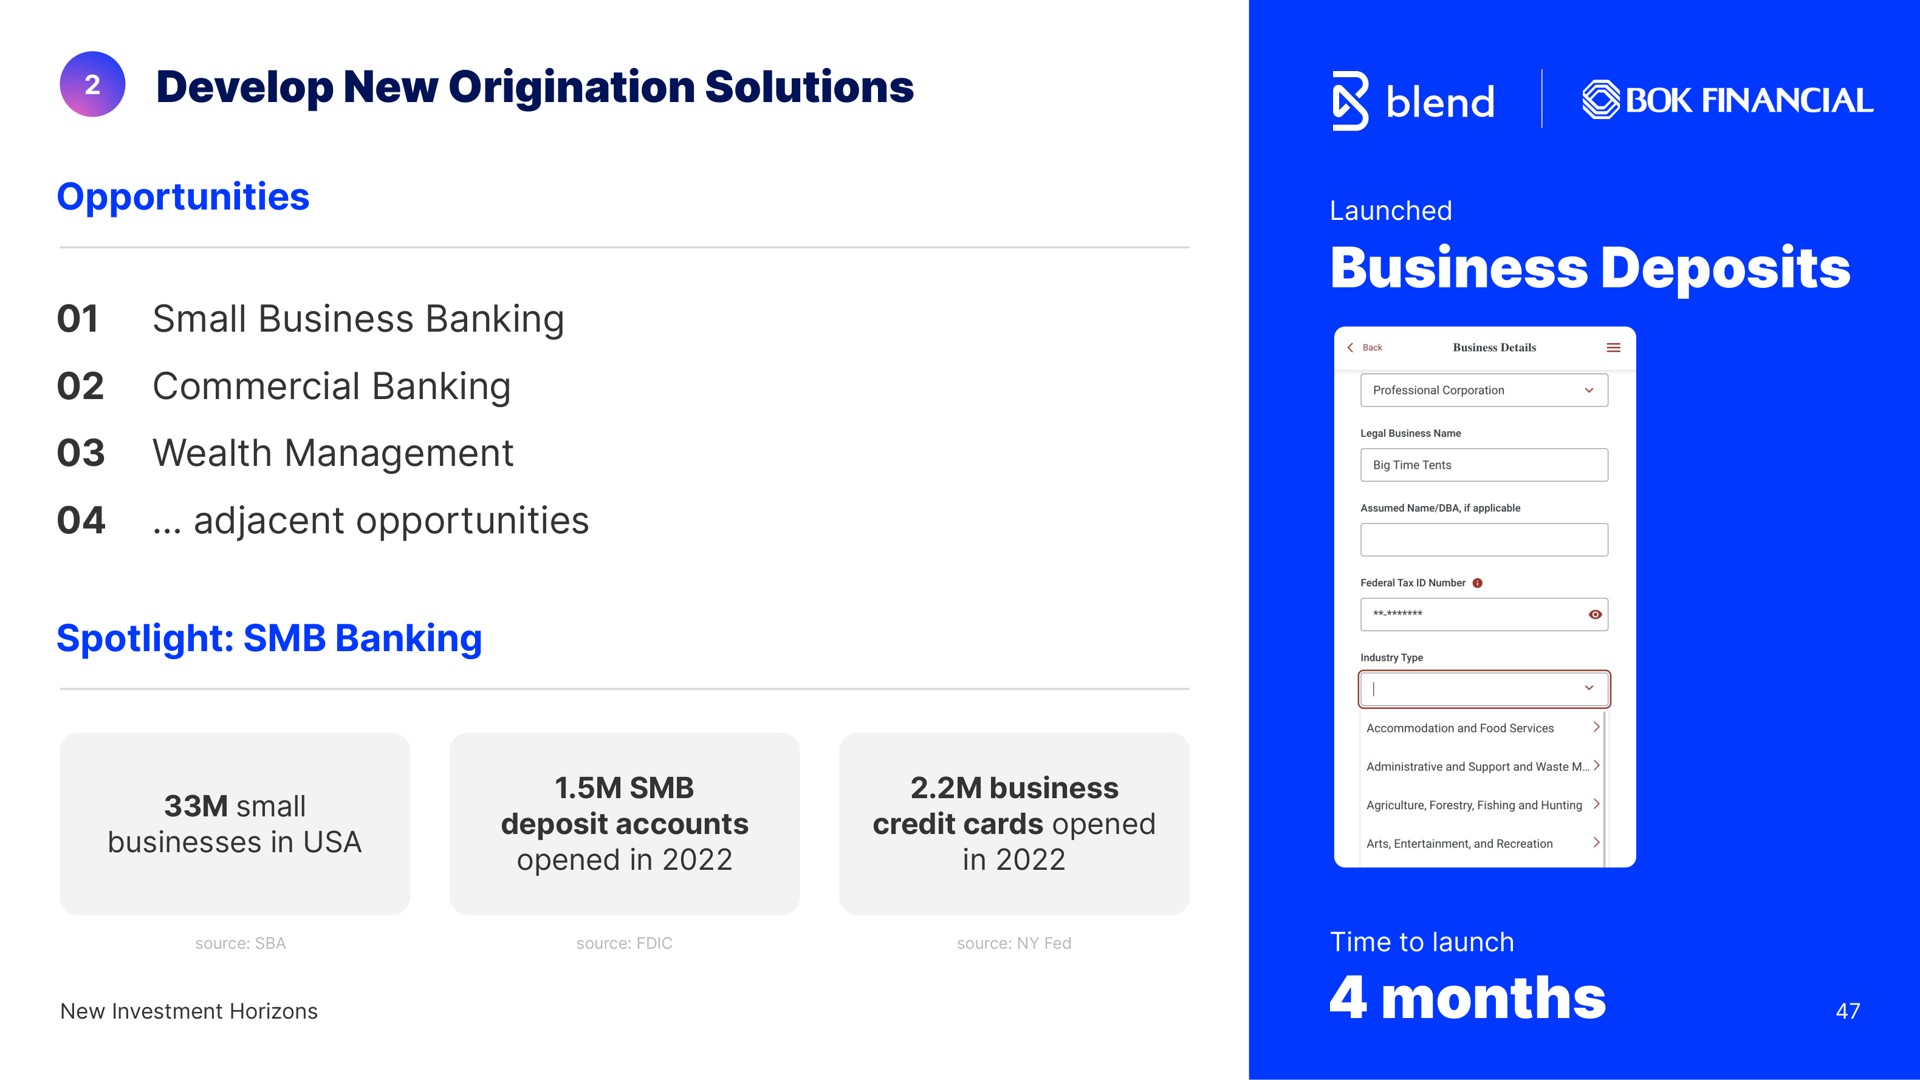 develop new origination solutions opportunities small business banking commercial banking wealth management adjacent opportunities spotlight banking business deposits small businesses in deposit accounts opened in business credit cards opened in months a launched | Blend